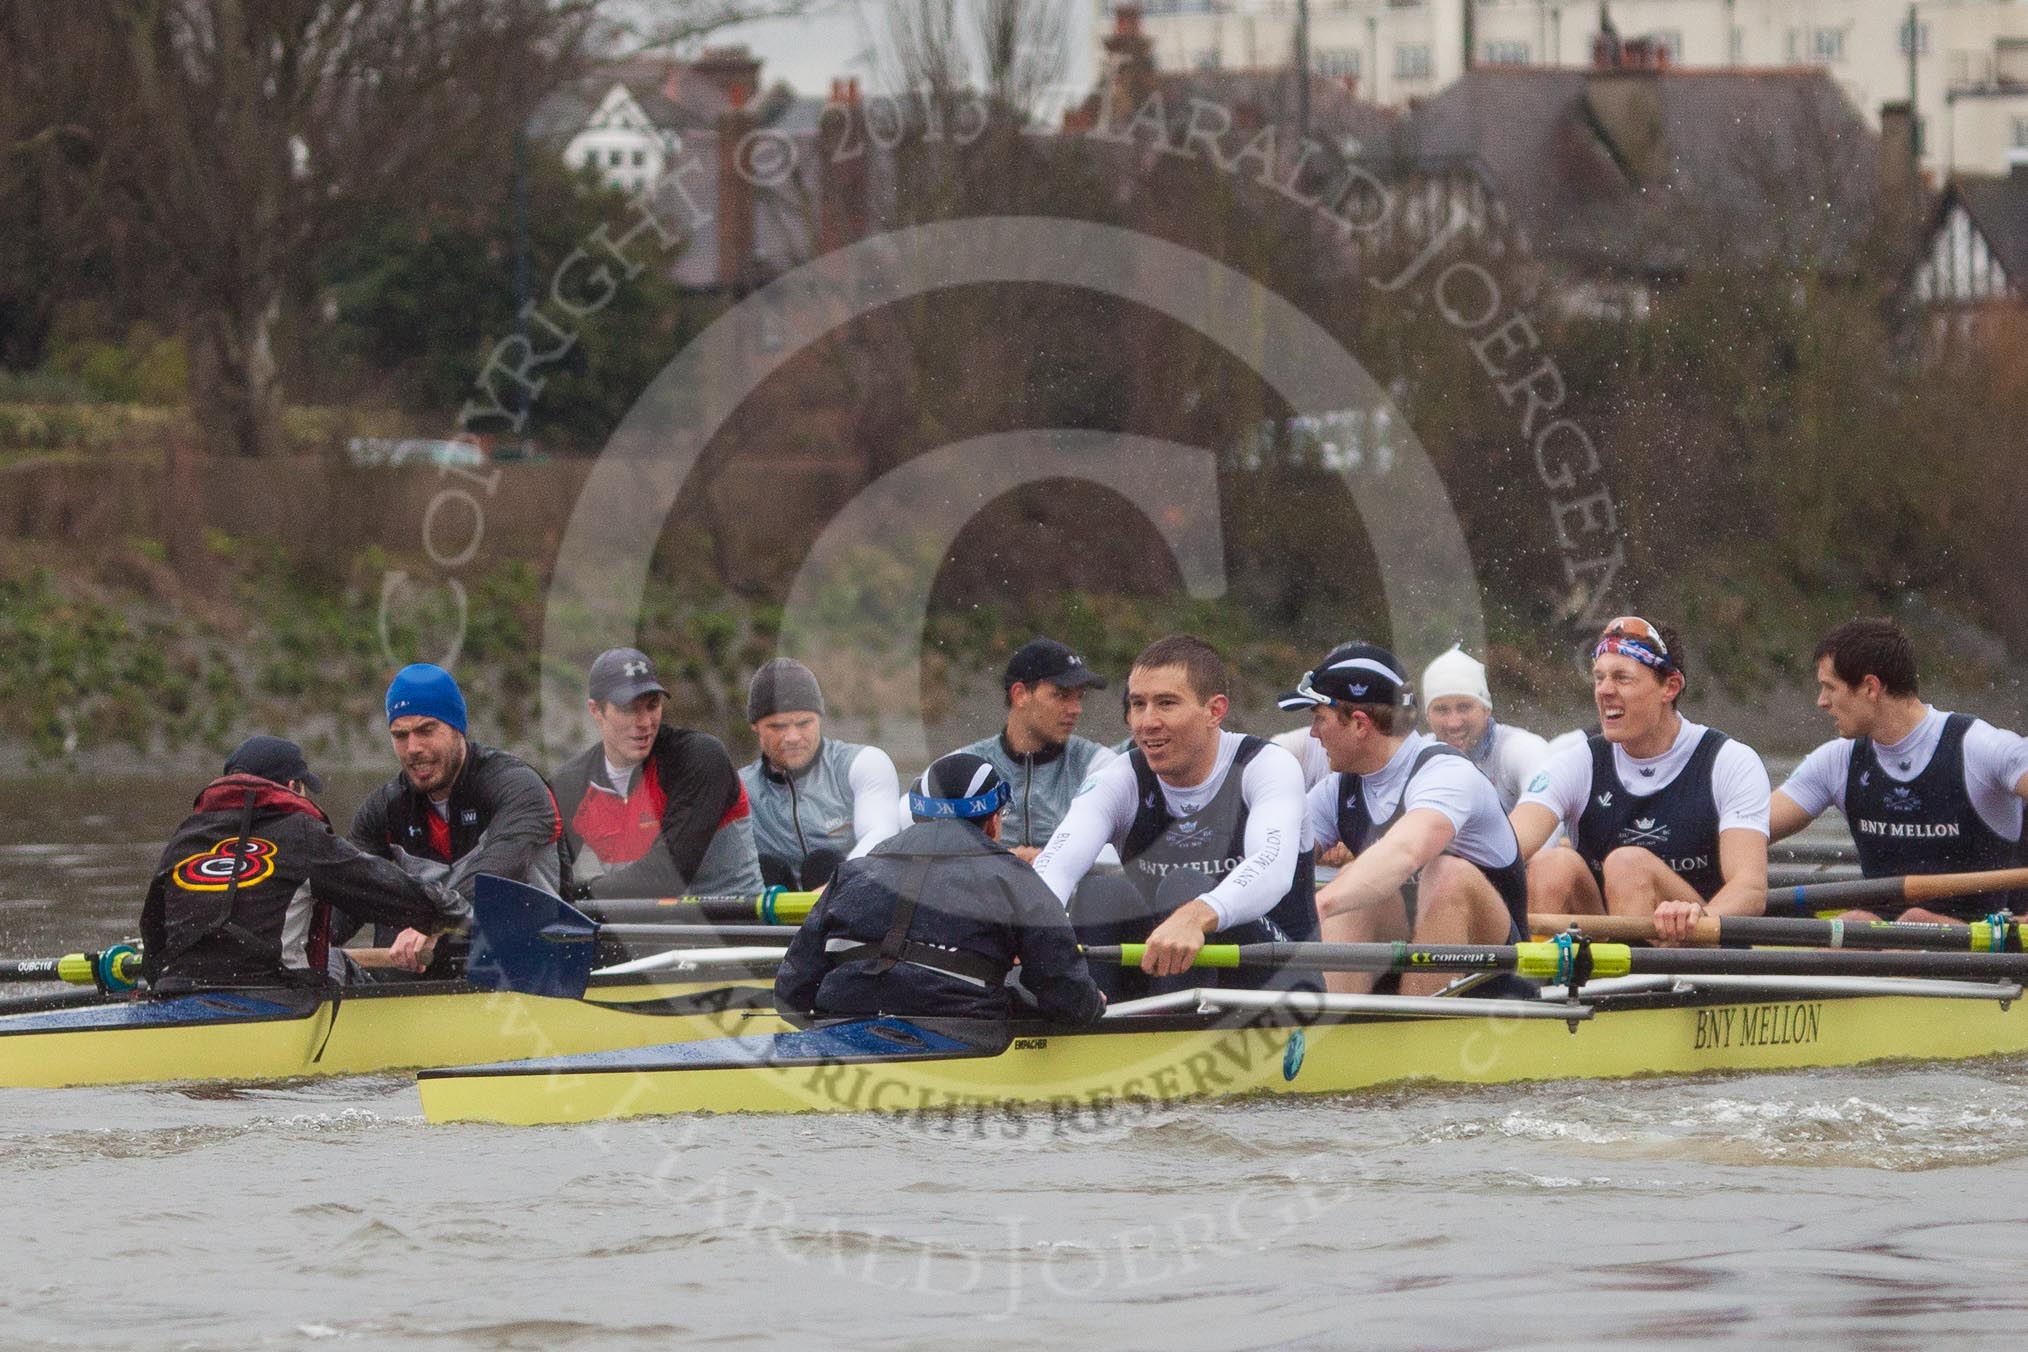 The Boat Race season 2013 - fixture OUBC vs German Eight.
River Thames,
London SW15,

United Kingdom,
on 17 March 2013 at 15:27, image #144